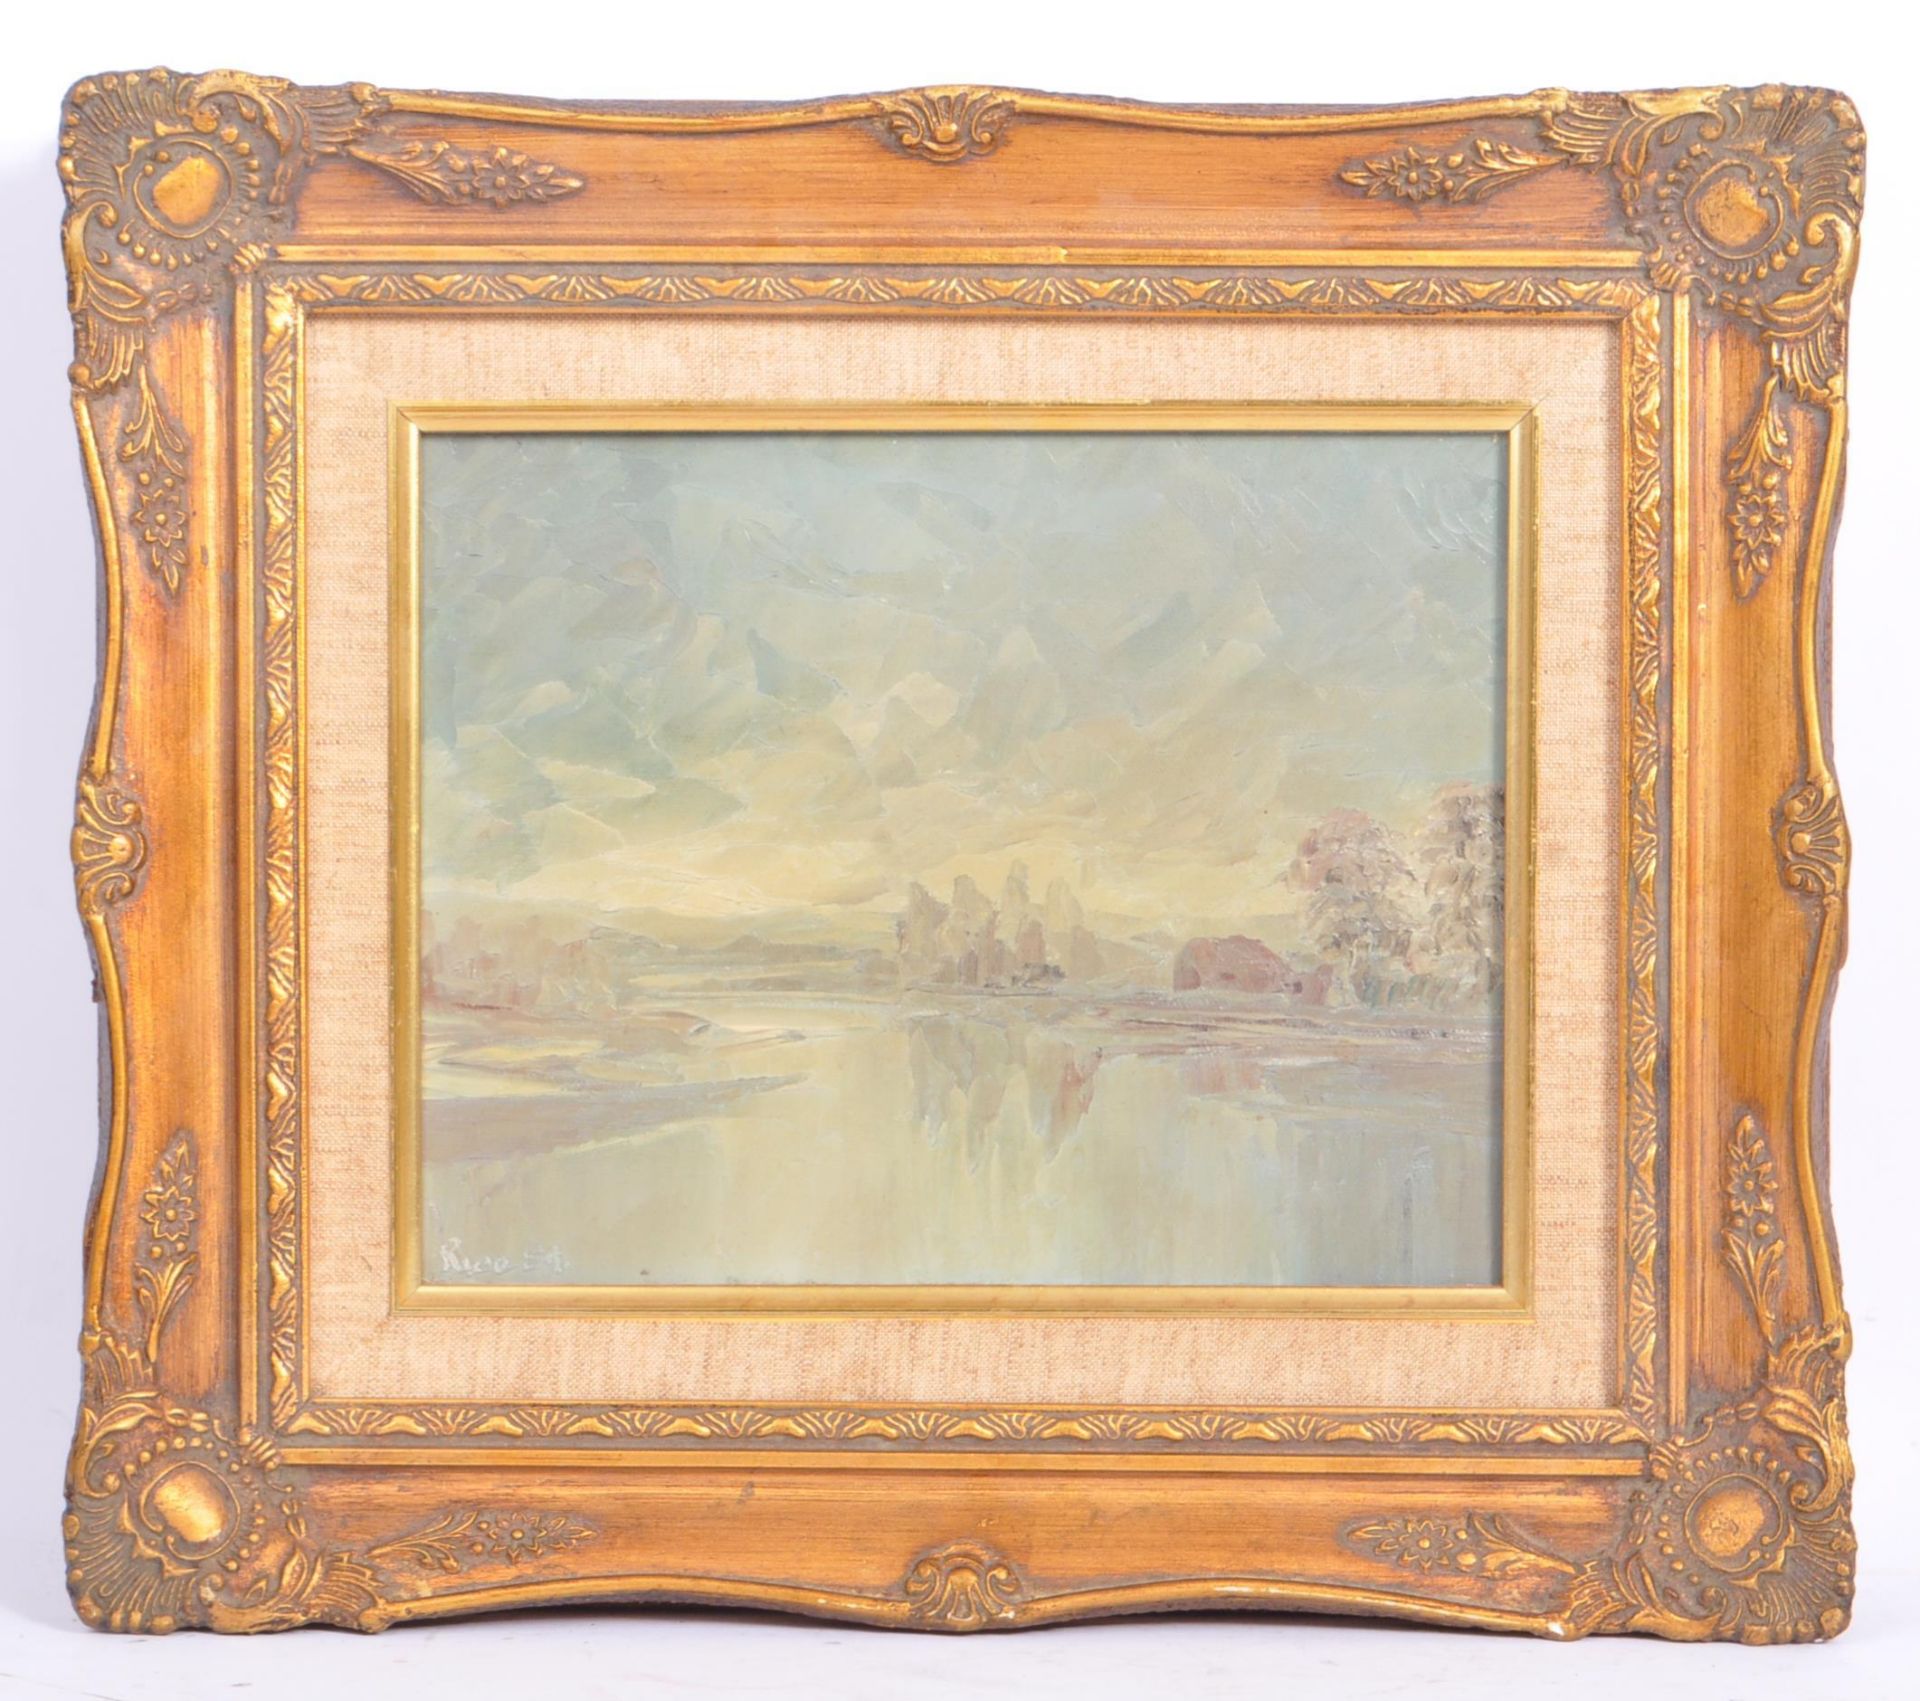 20TH CENTURY GILT FRAMED OIL ON CANVAS BY BRIAN D HORSWELL - Image 6 of 8